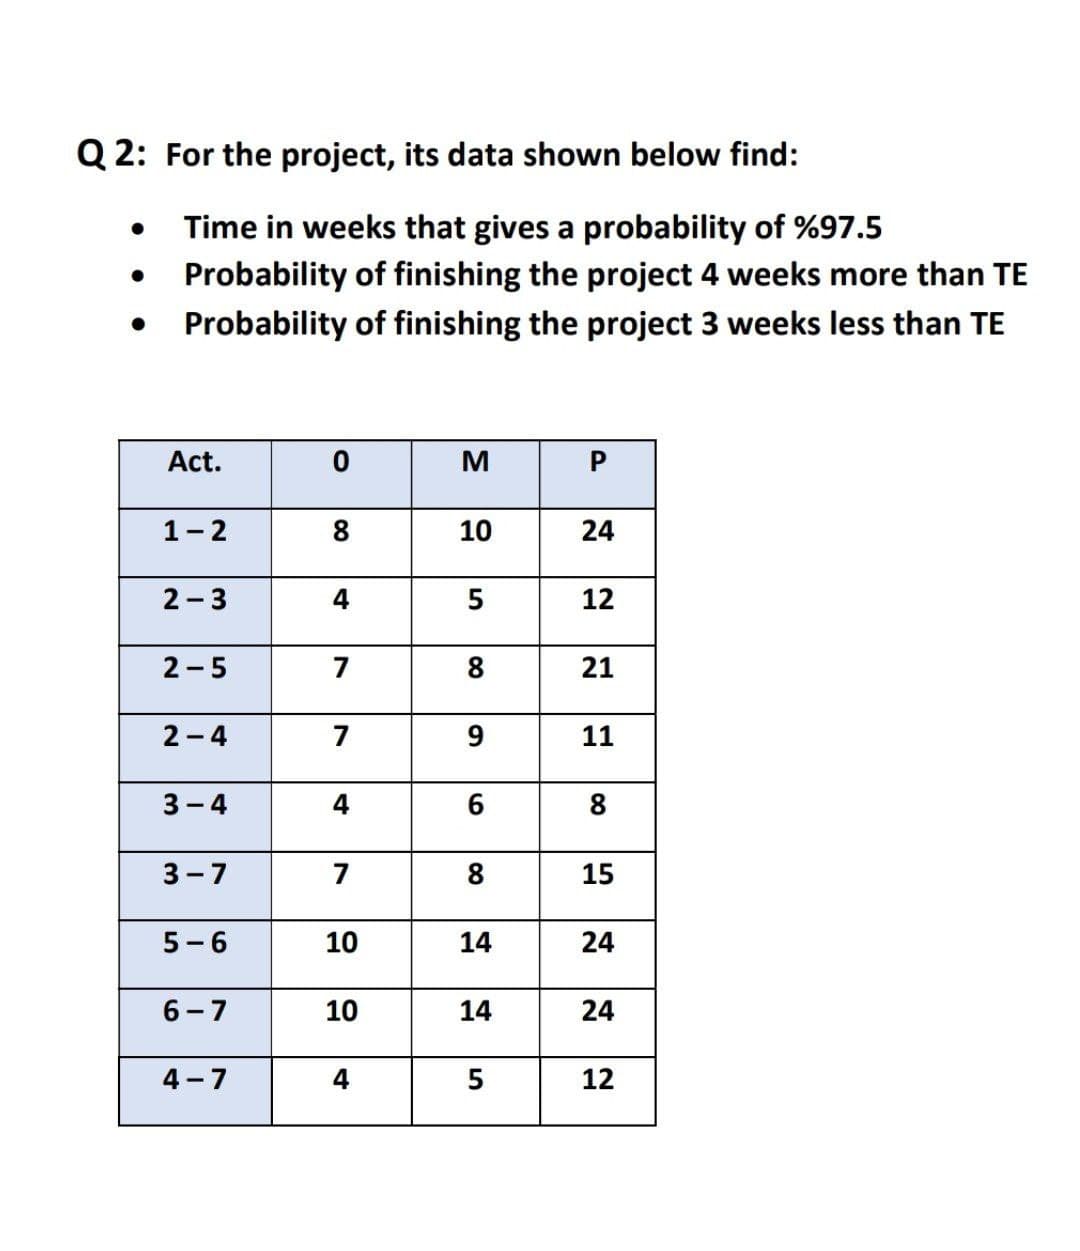 Q2: For the project, its data shown below find:
●
Time in weeks that gives a probability of %97.5
Probability of finishing the project 4 weeks more than TE
Probability of finishing the project 3 weeks less than TE
Act.
1-2
2-3
2-5
2-4
3-4
3-7
5-6
6-7
4-7
0
8
4
7
7
4
7
10
10
4
M
10
5
9
6
8
14
14
5
P
24
12
21
11
8
15
24
24
12